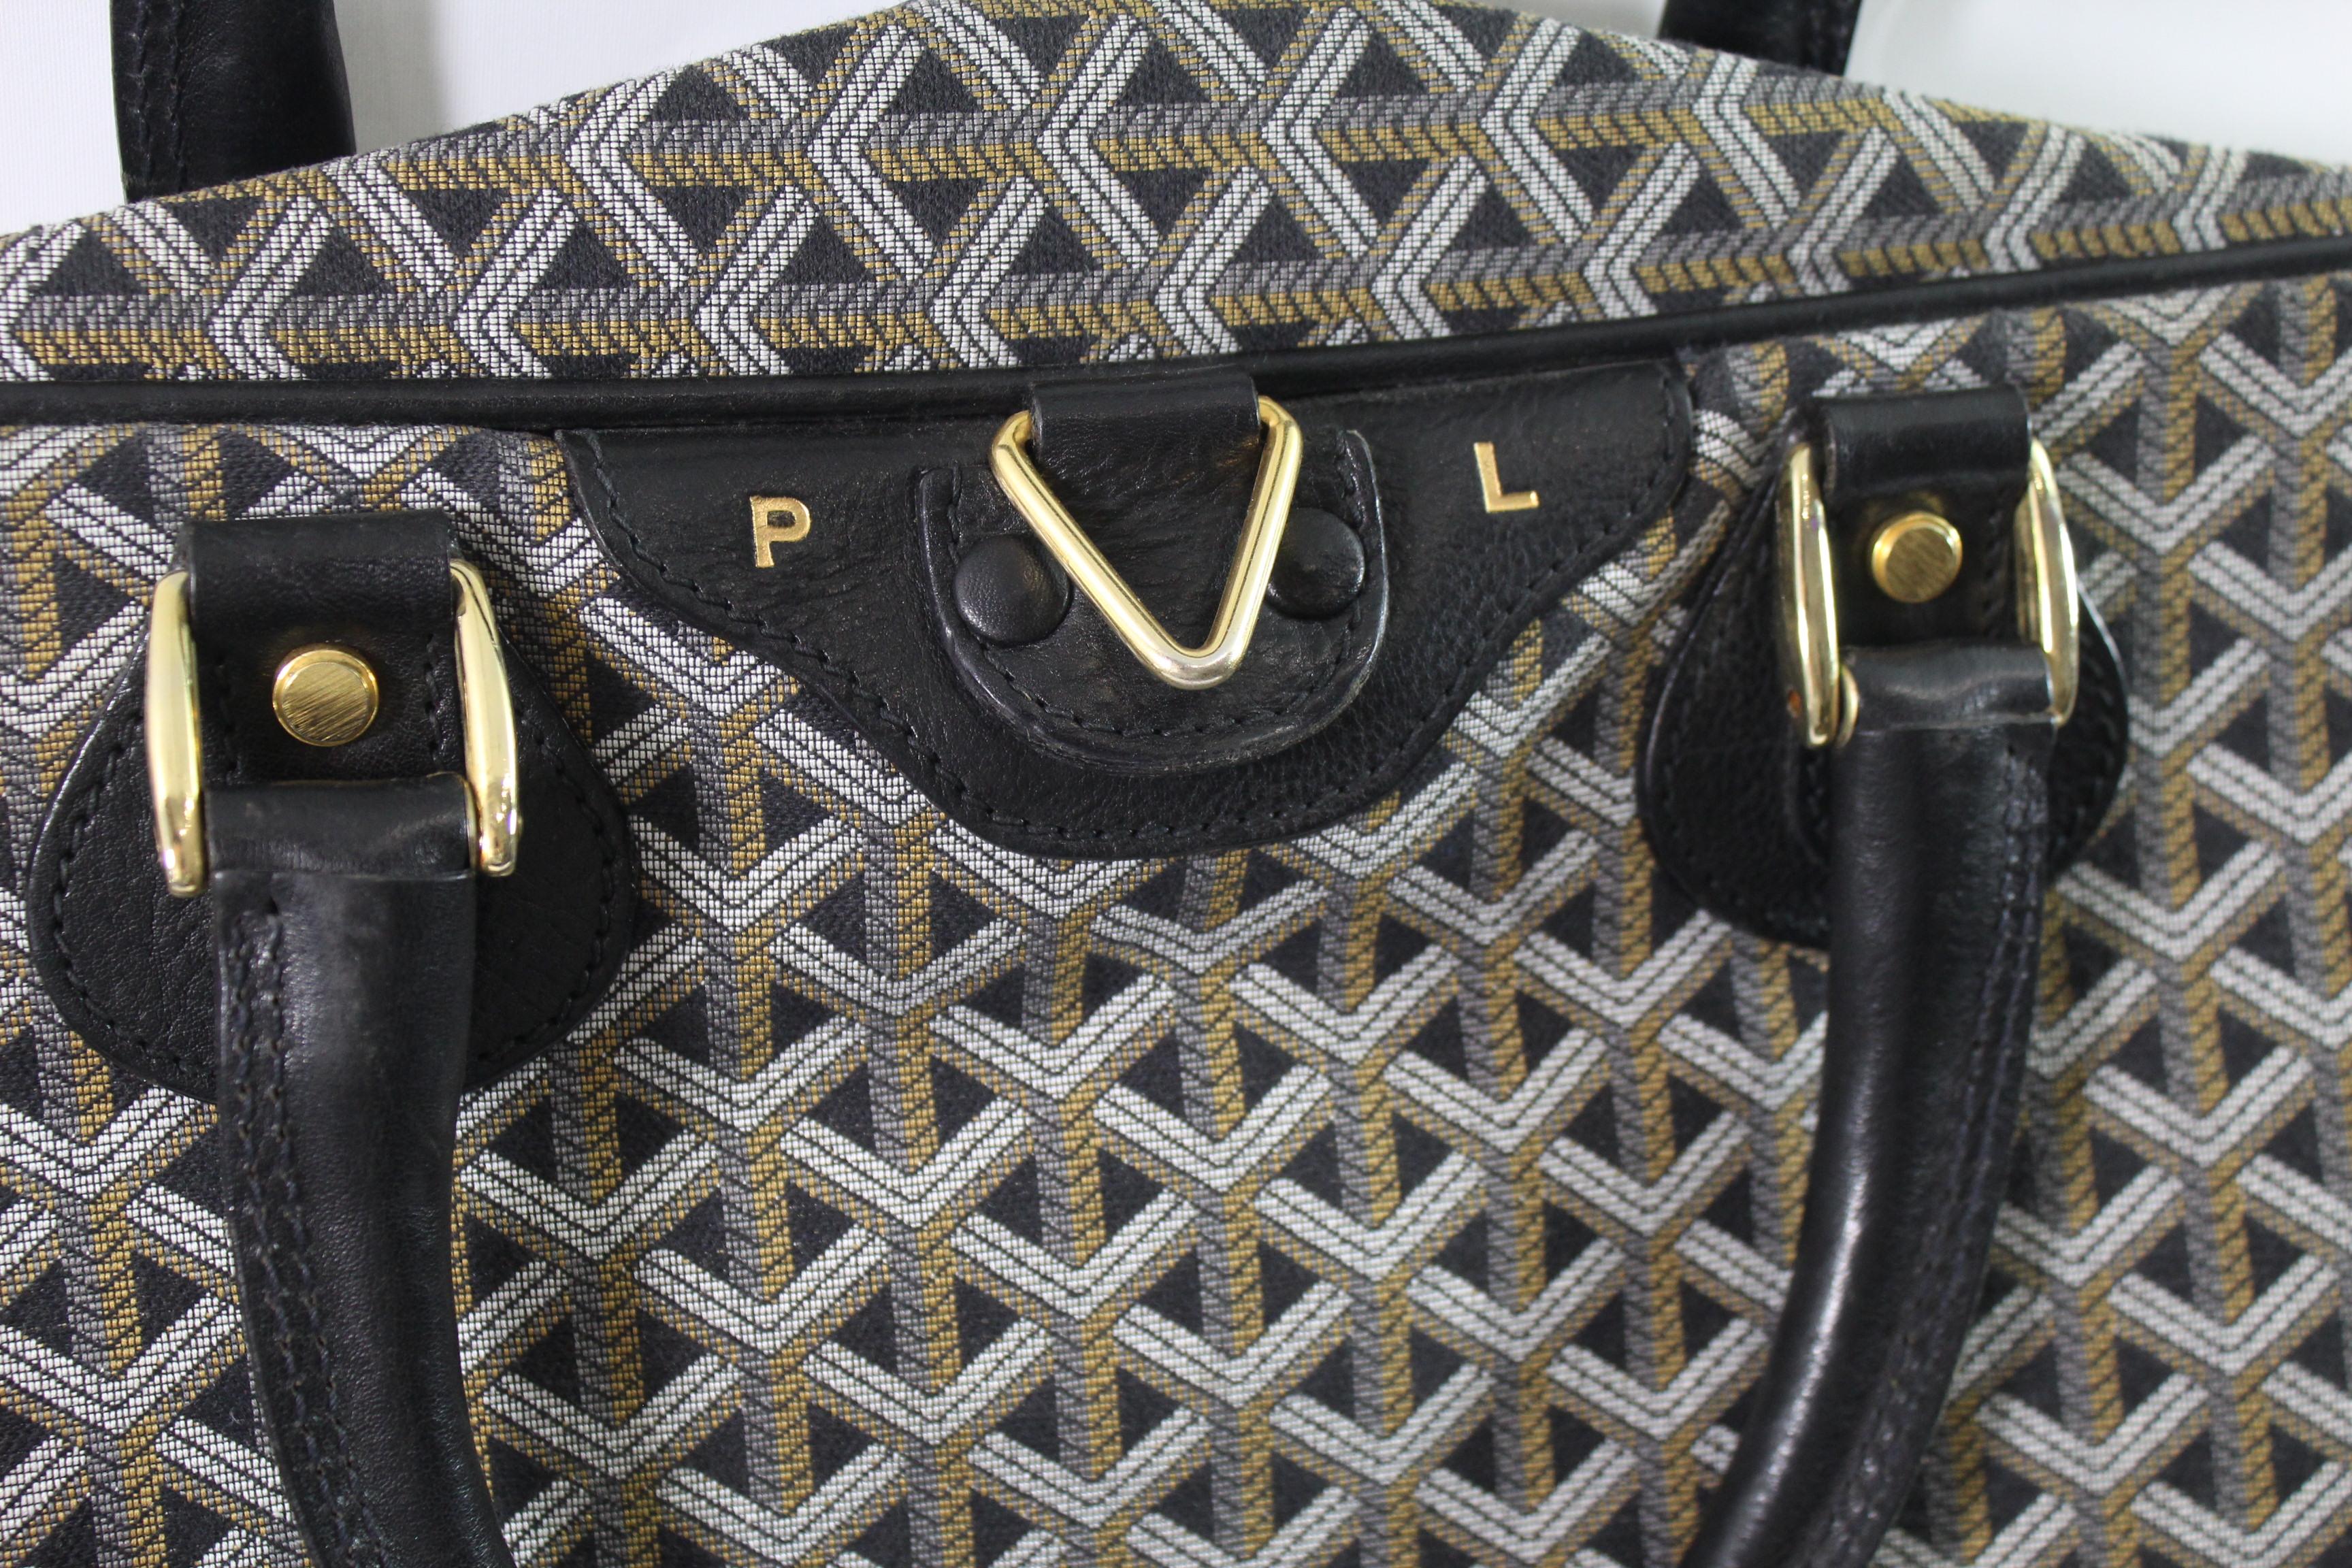 Vinate Goyard Suit trael bag in monogram canvas and leather.

really good vintage condition

Piece from the 70's

With initials engraved

Interior in really good condition

Without strap 

Size 48*39 cm
